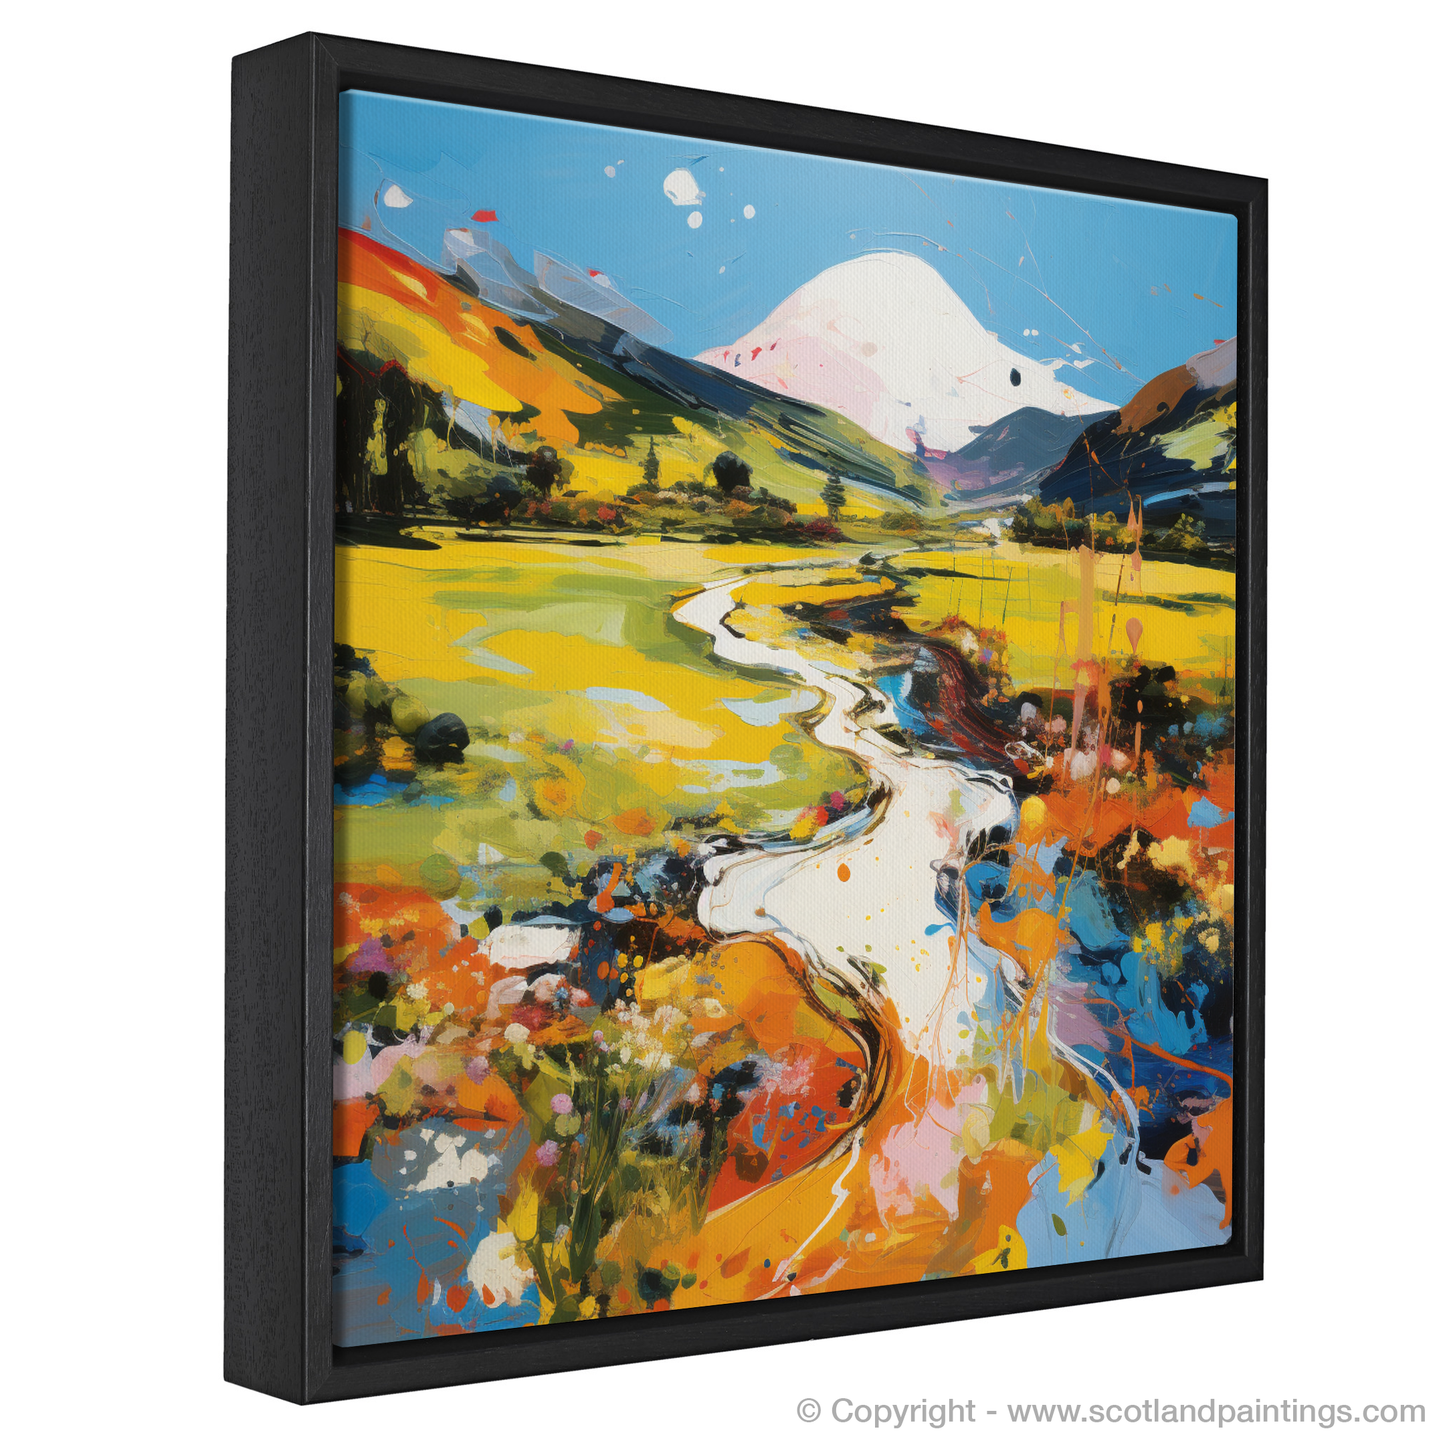 Painting and Art Print of Glen Roy, Highlands in summer entitled "Vivid Glen Roy: A Highland Summer Abstract".